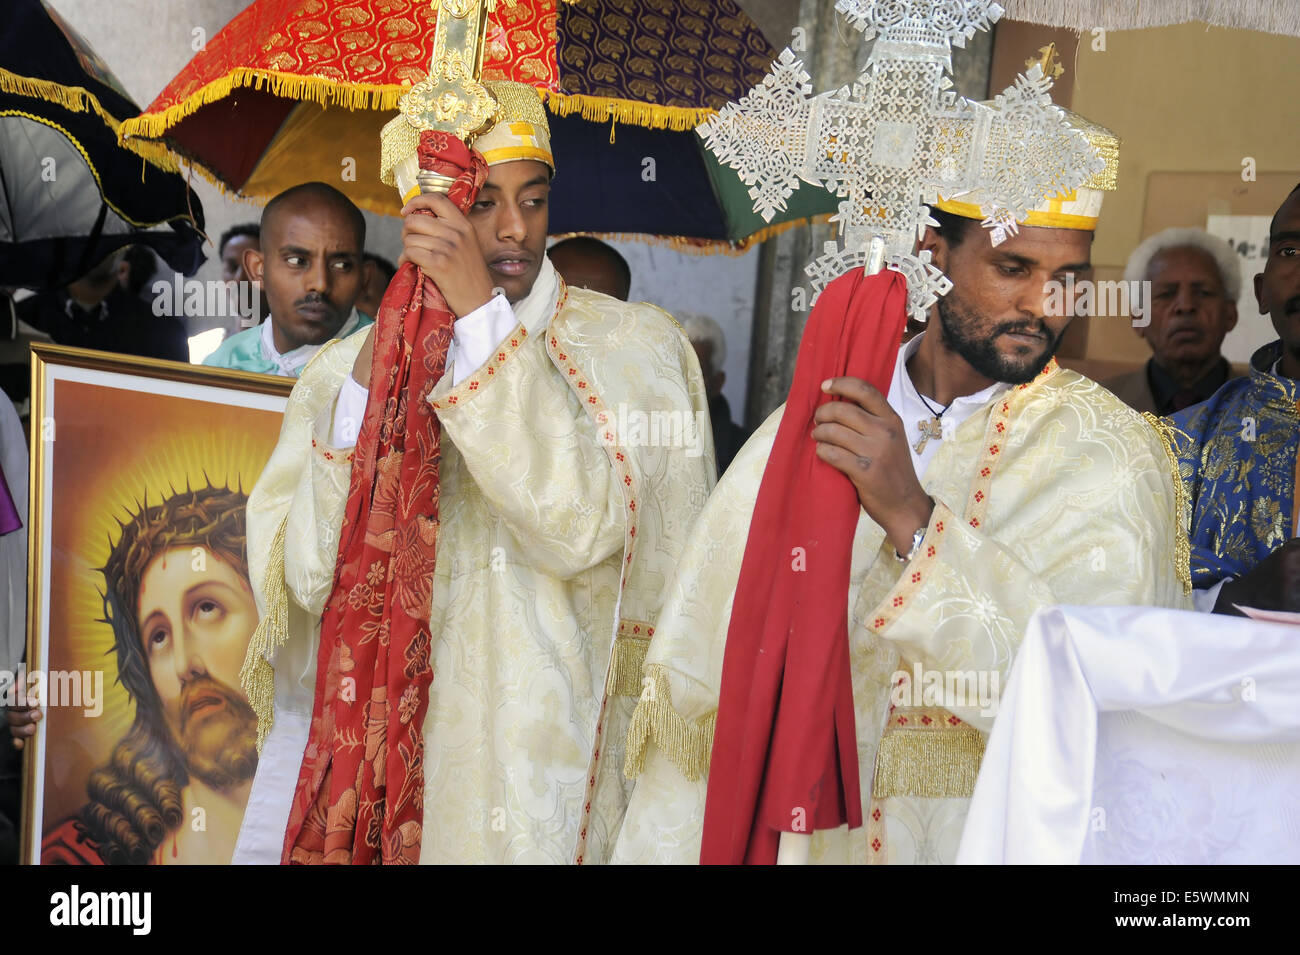 Milan (Italy), celebration for the Nativity of Our Lady in the Orthodox church of the Eritrean community Stock Photo